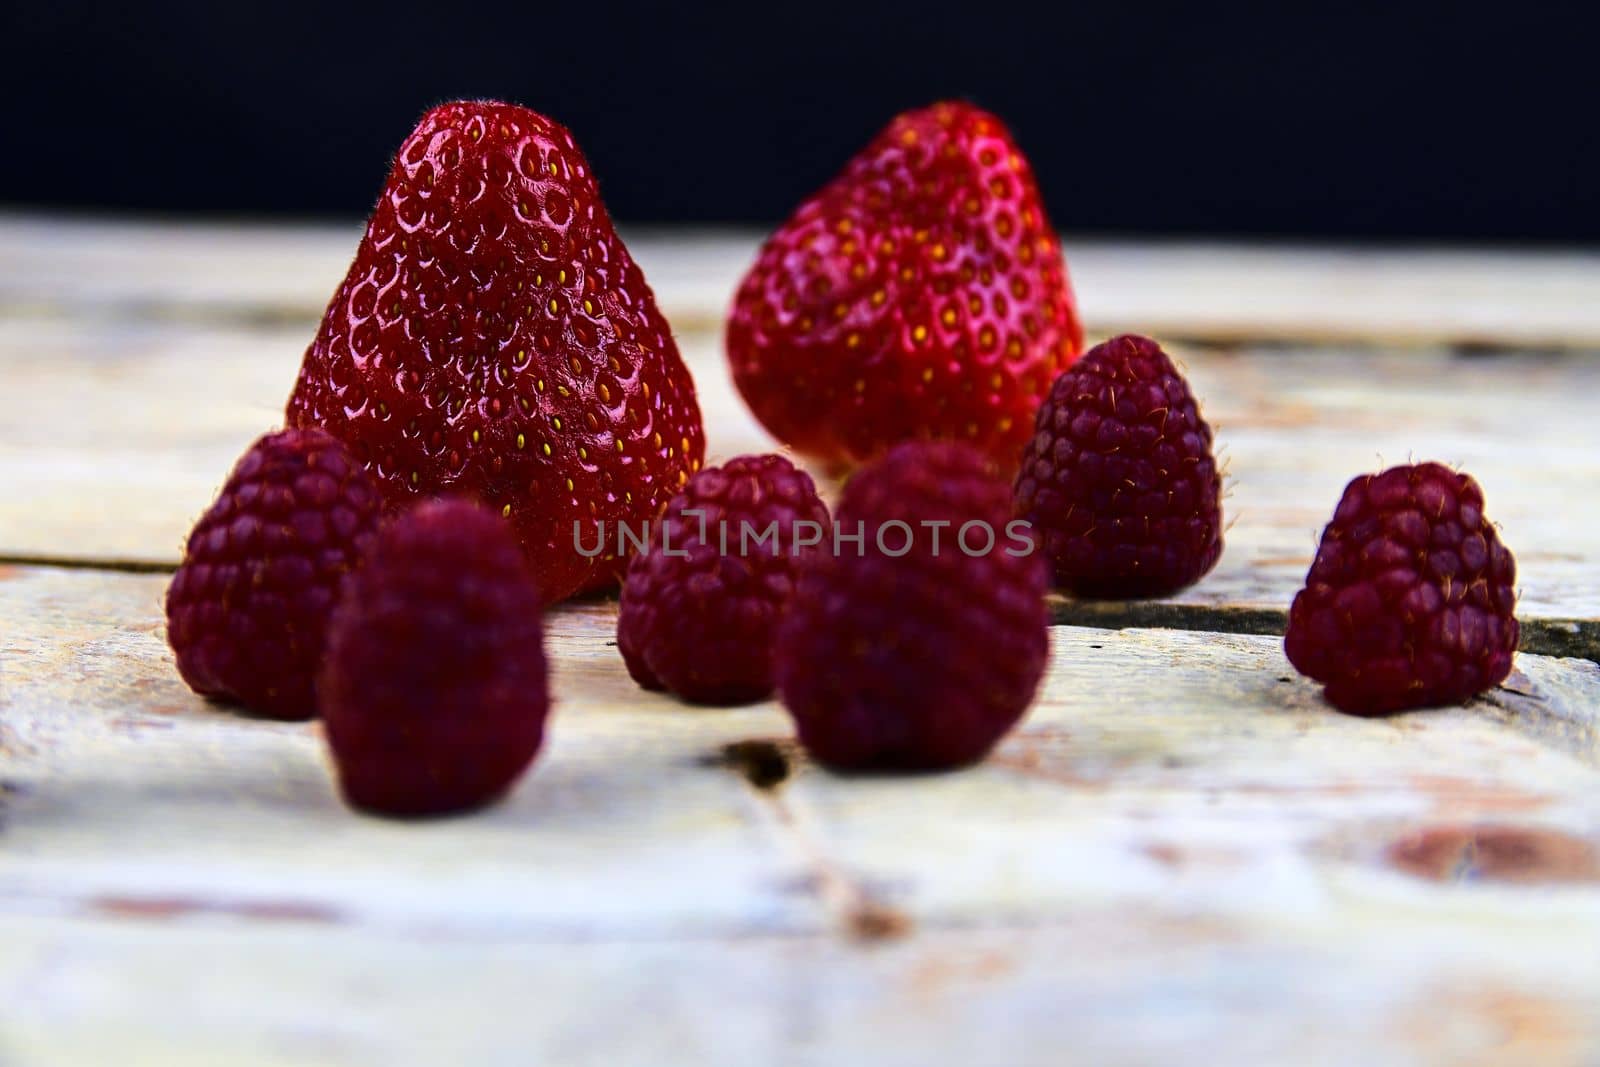 Strawberries and raspberries on rustic white wooden background. White and black background. Dark image. 